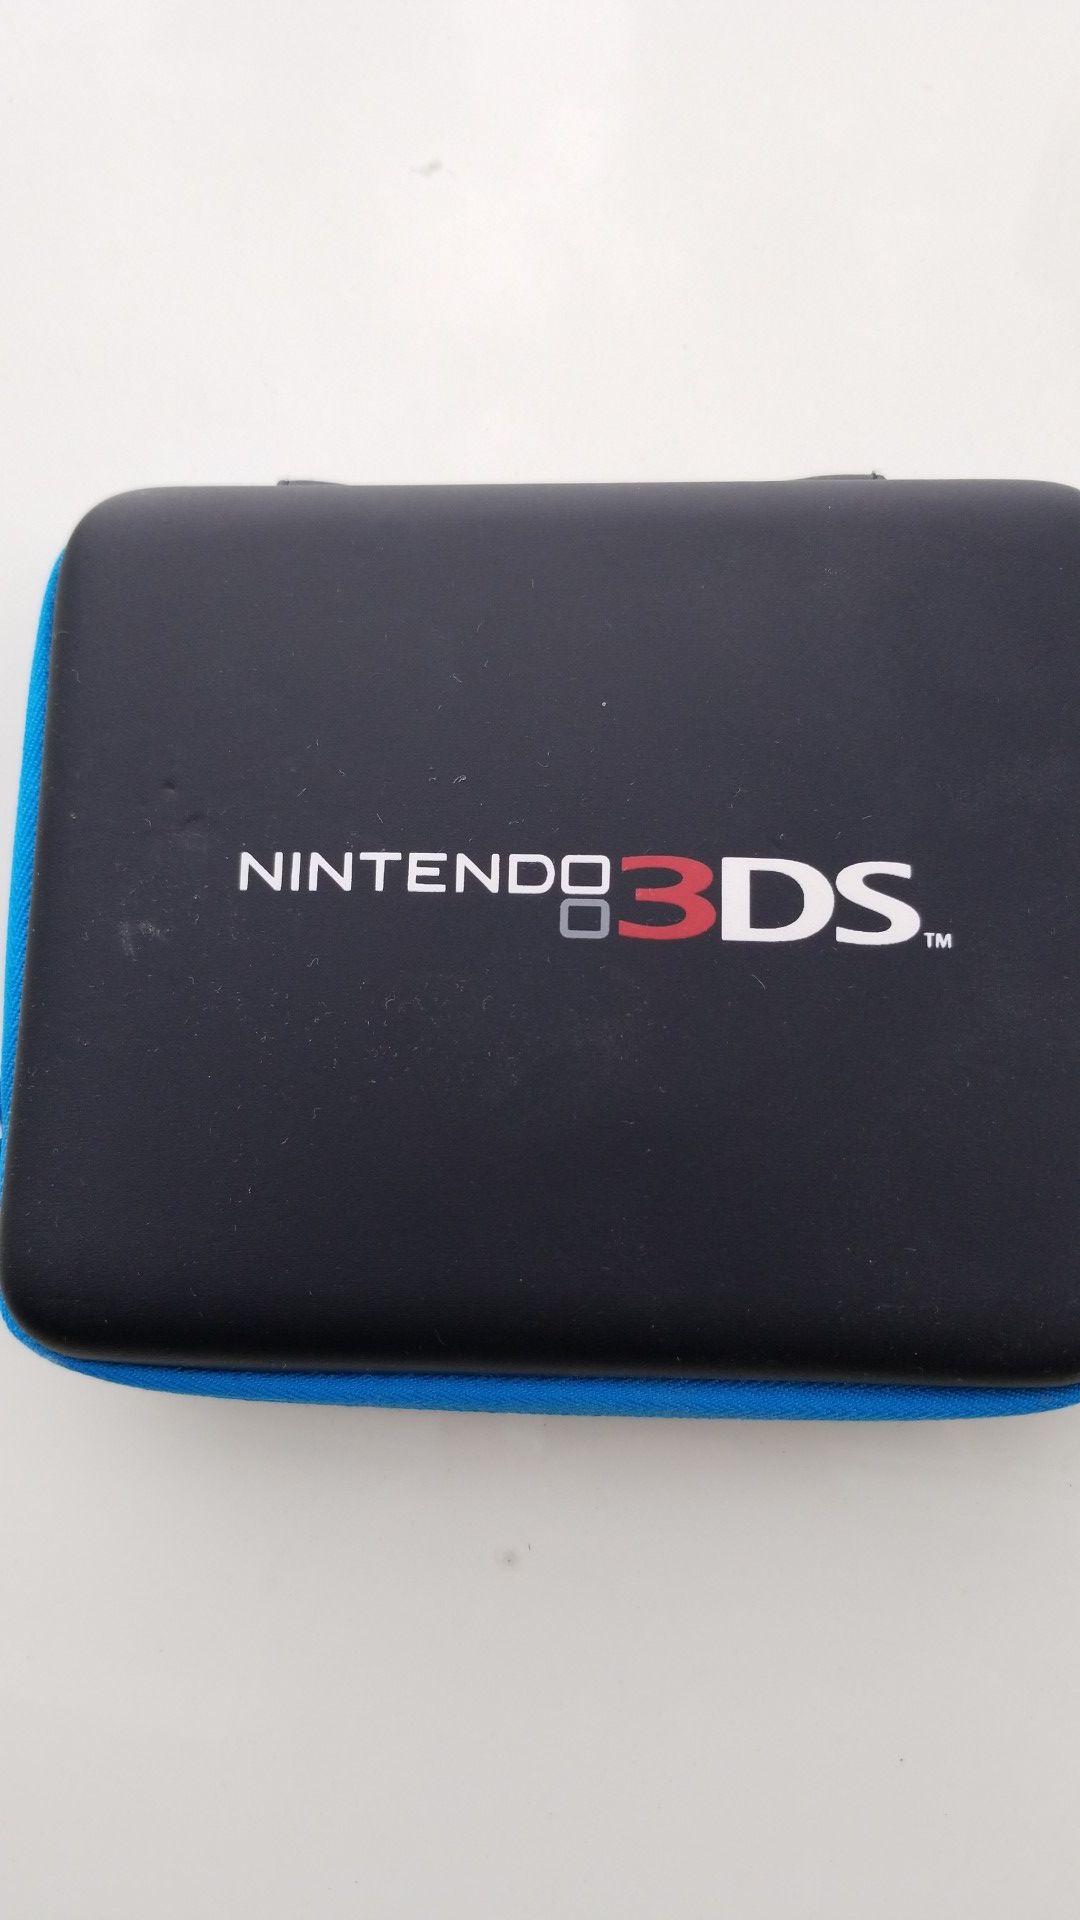 NINTENDO 3DS CASE WITH HEADPHONES AND CHARGER. GAME INCLUDED